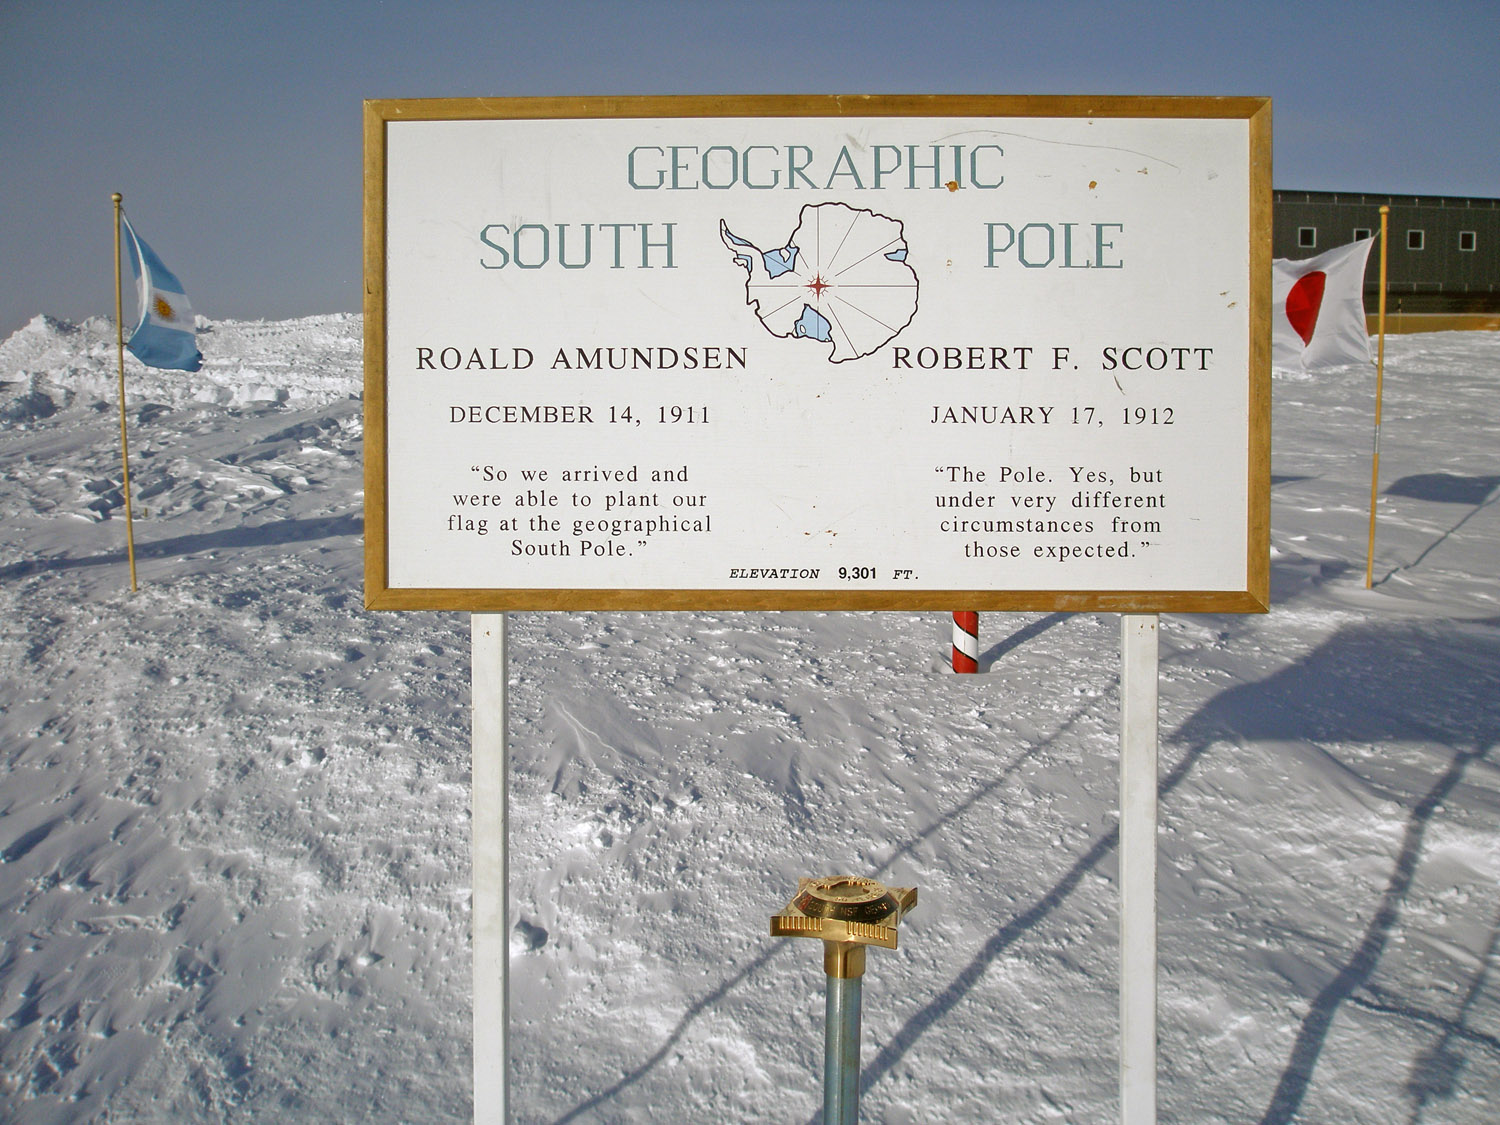 South Pole Station and - Geographic South Pole - 3